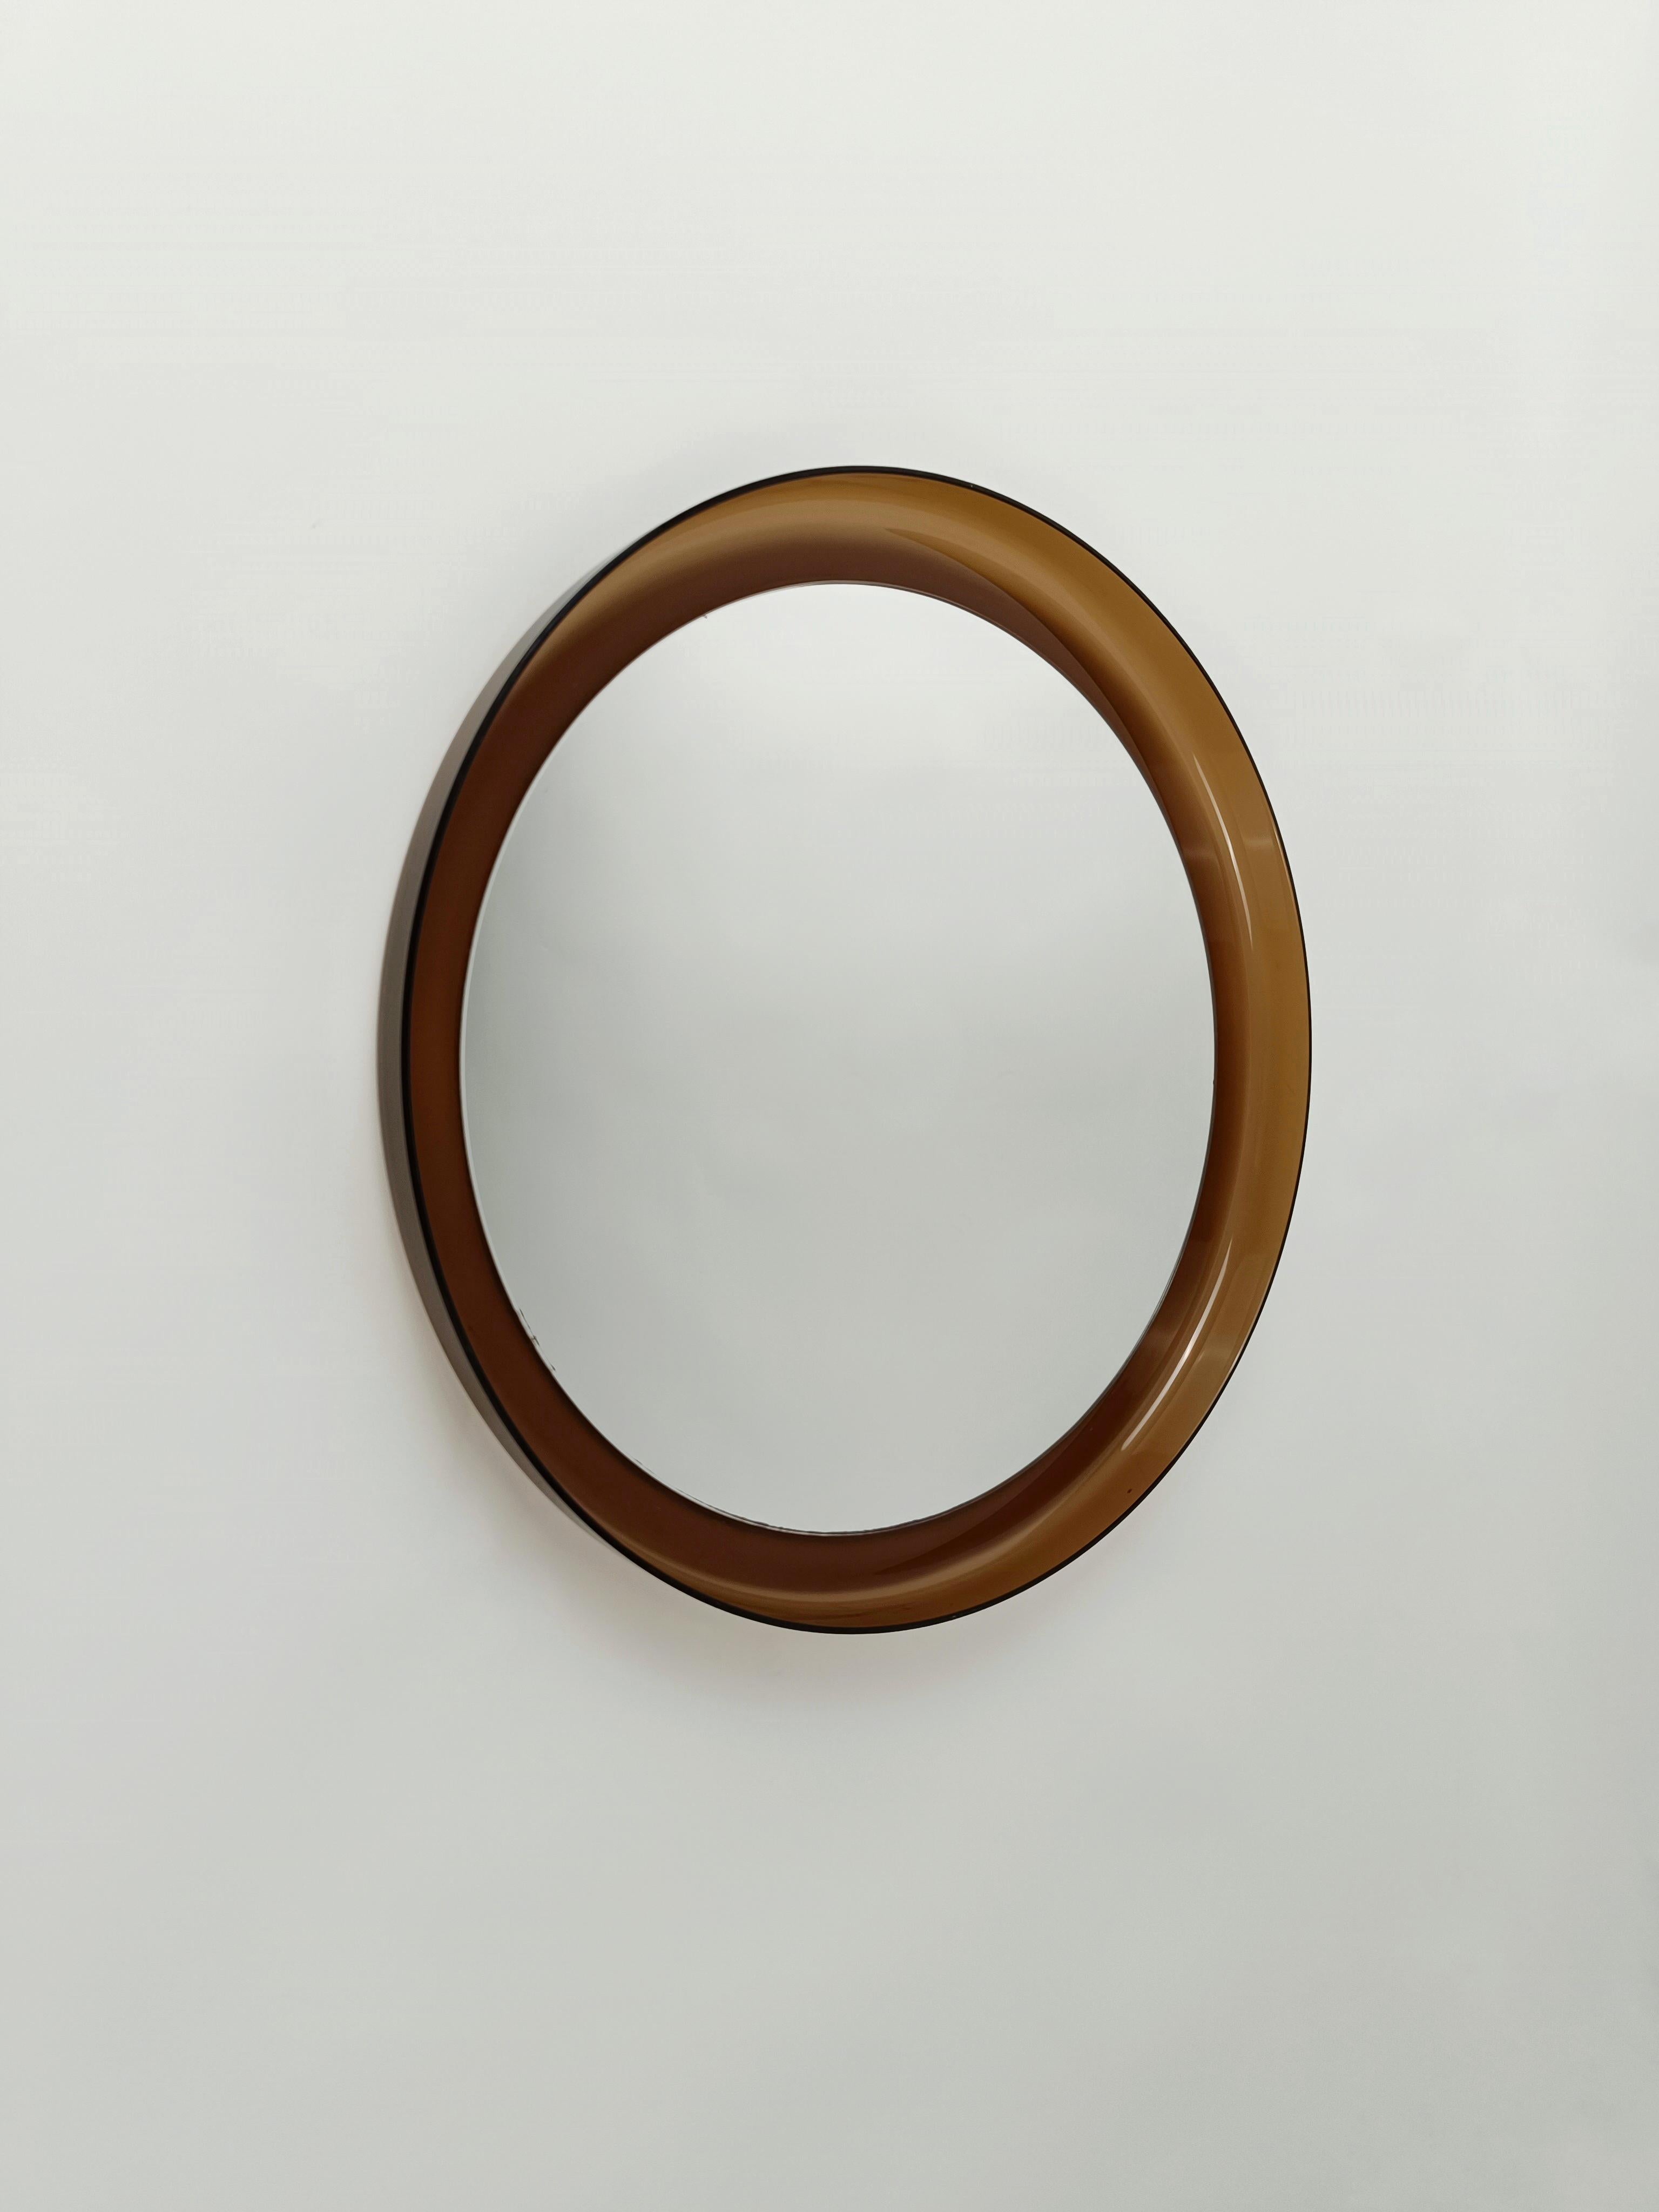 An Italian Space Age Round Mirror in Smoked Lucite by Guzzini 1960s  For Sale 7